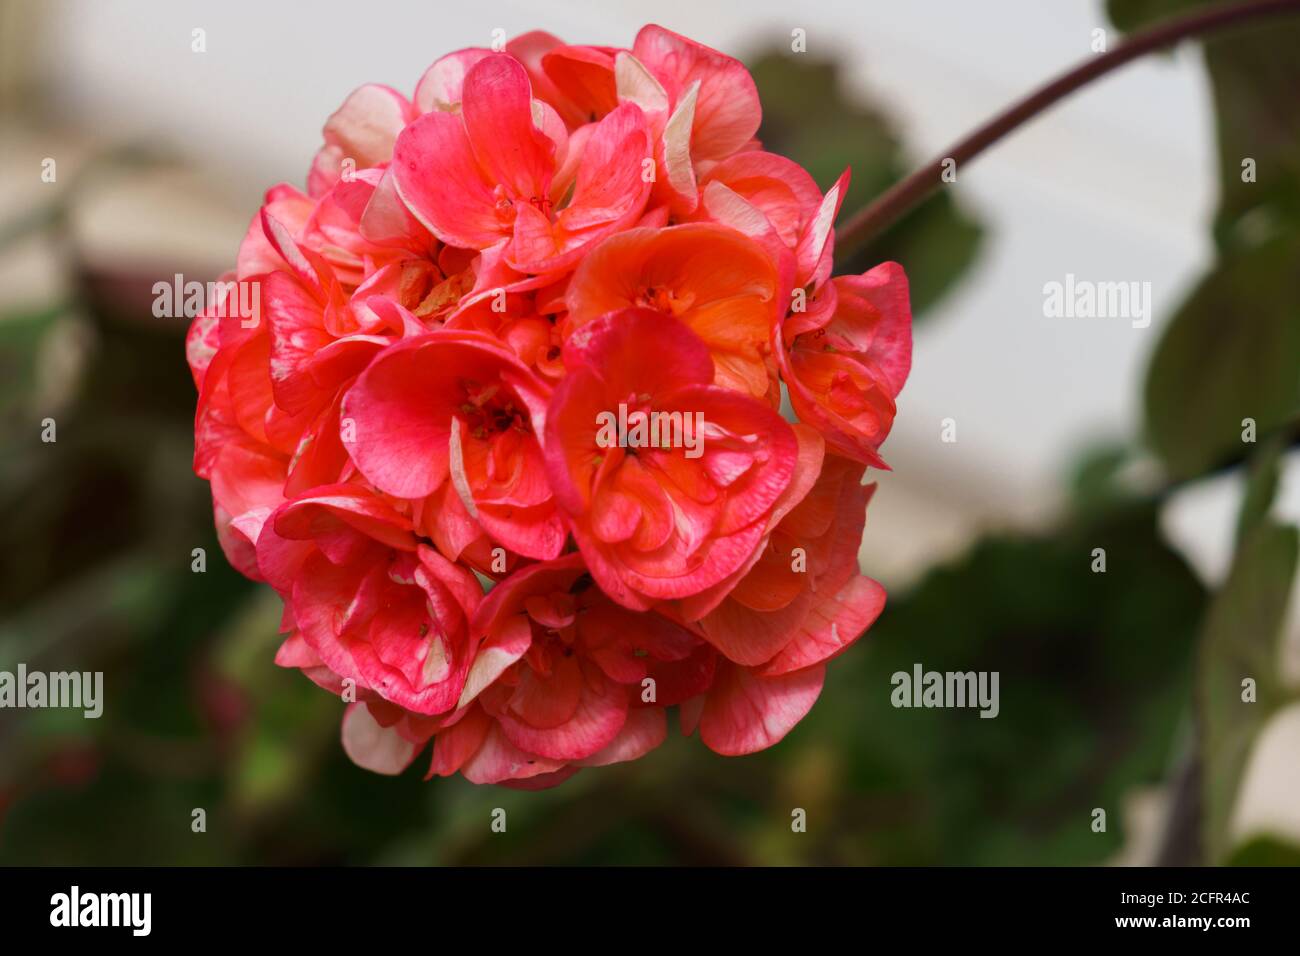 Bright pink bud of a geranium flower on a wall background Stock Photo